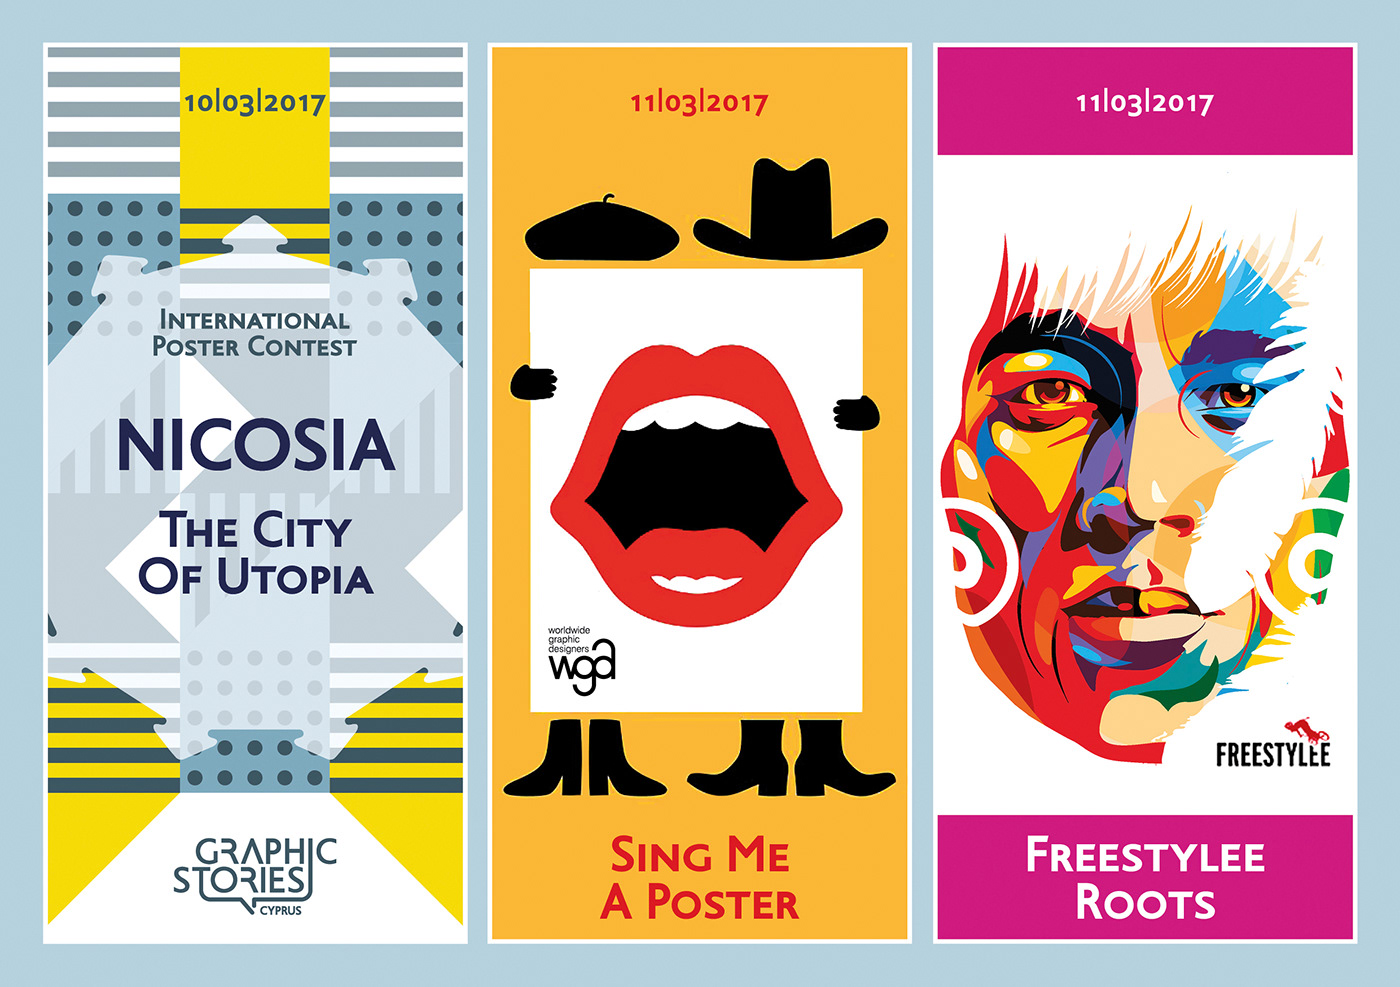 poster posters identity flyers Program graphic stories Graphic Stories Cyprus international poster contest graphic design  Visual Communication